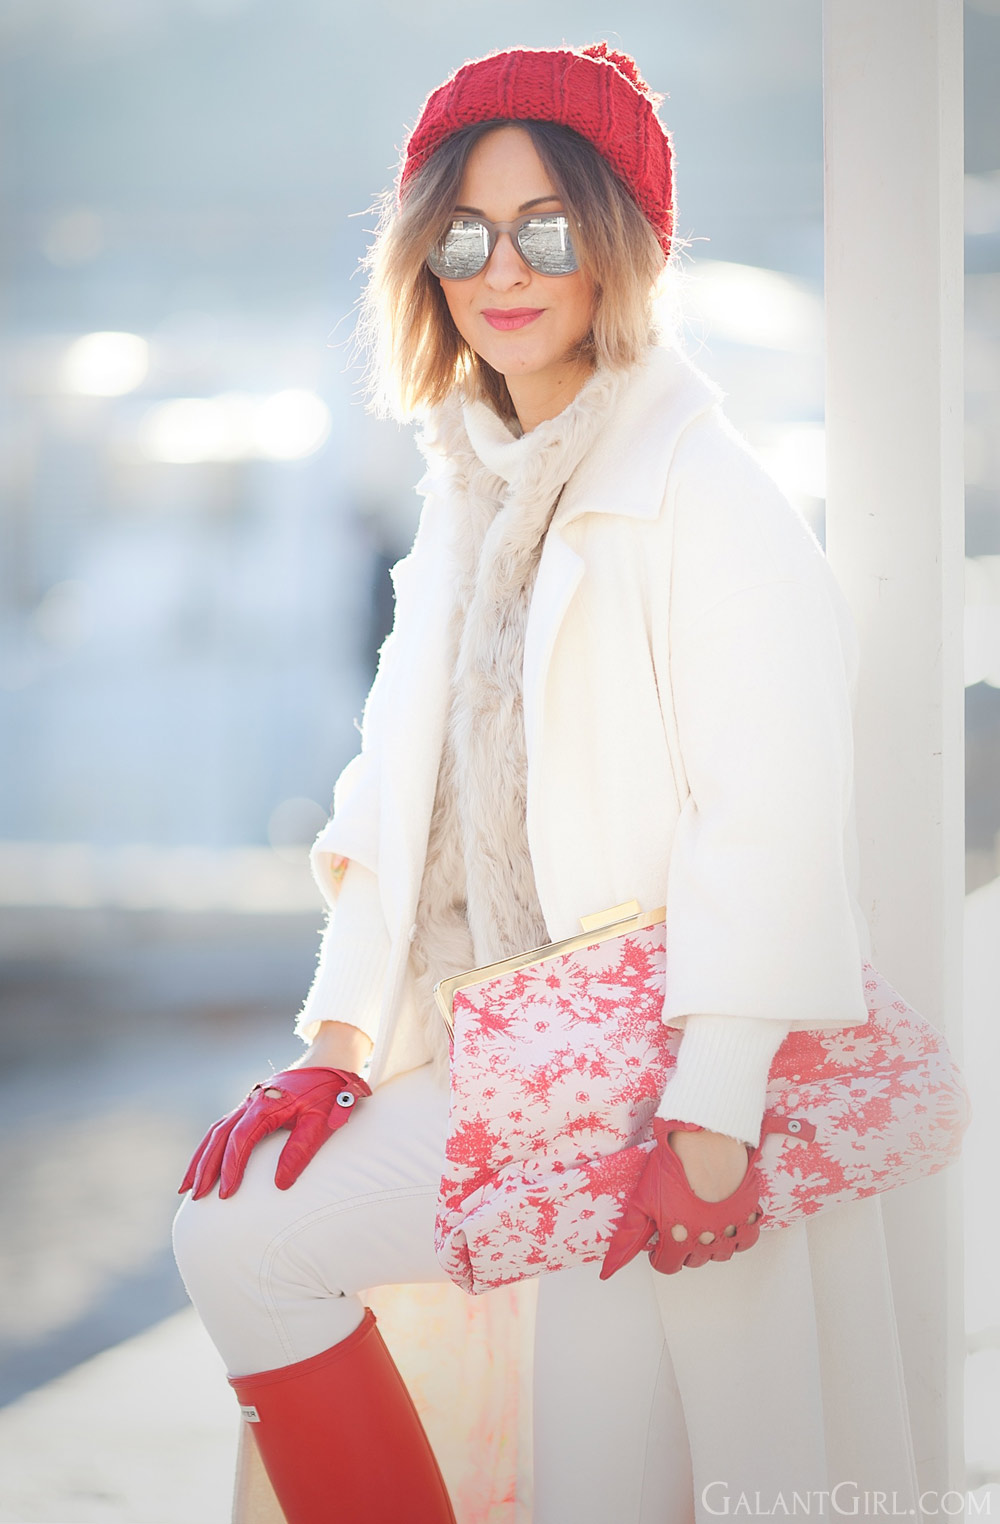 stella mccartney clutch and red hunter boots and white coat outfit for winter by fashion blogger Ellena Galant